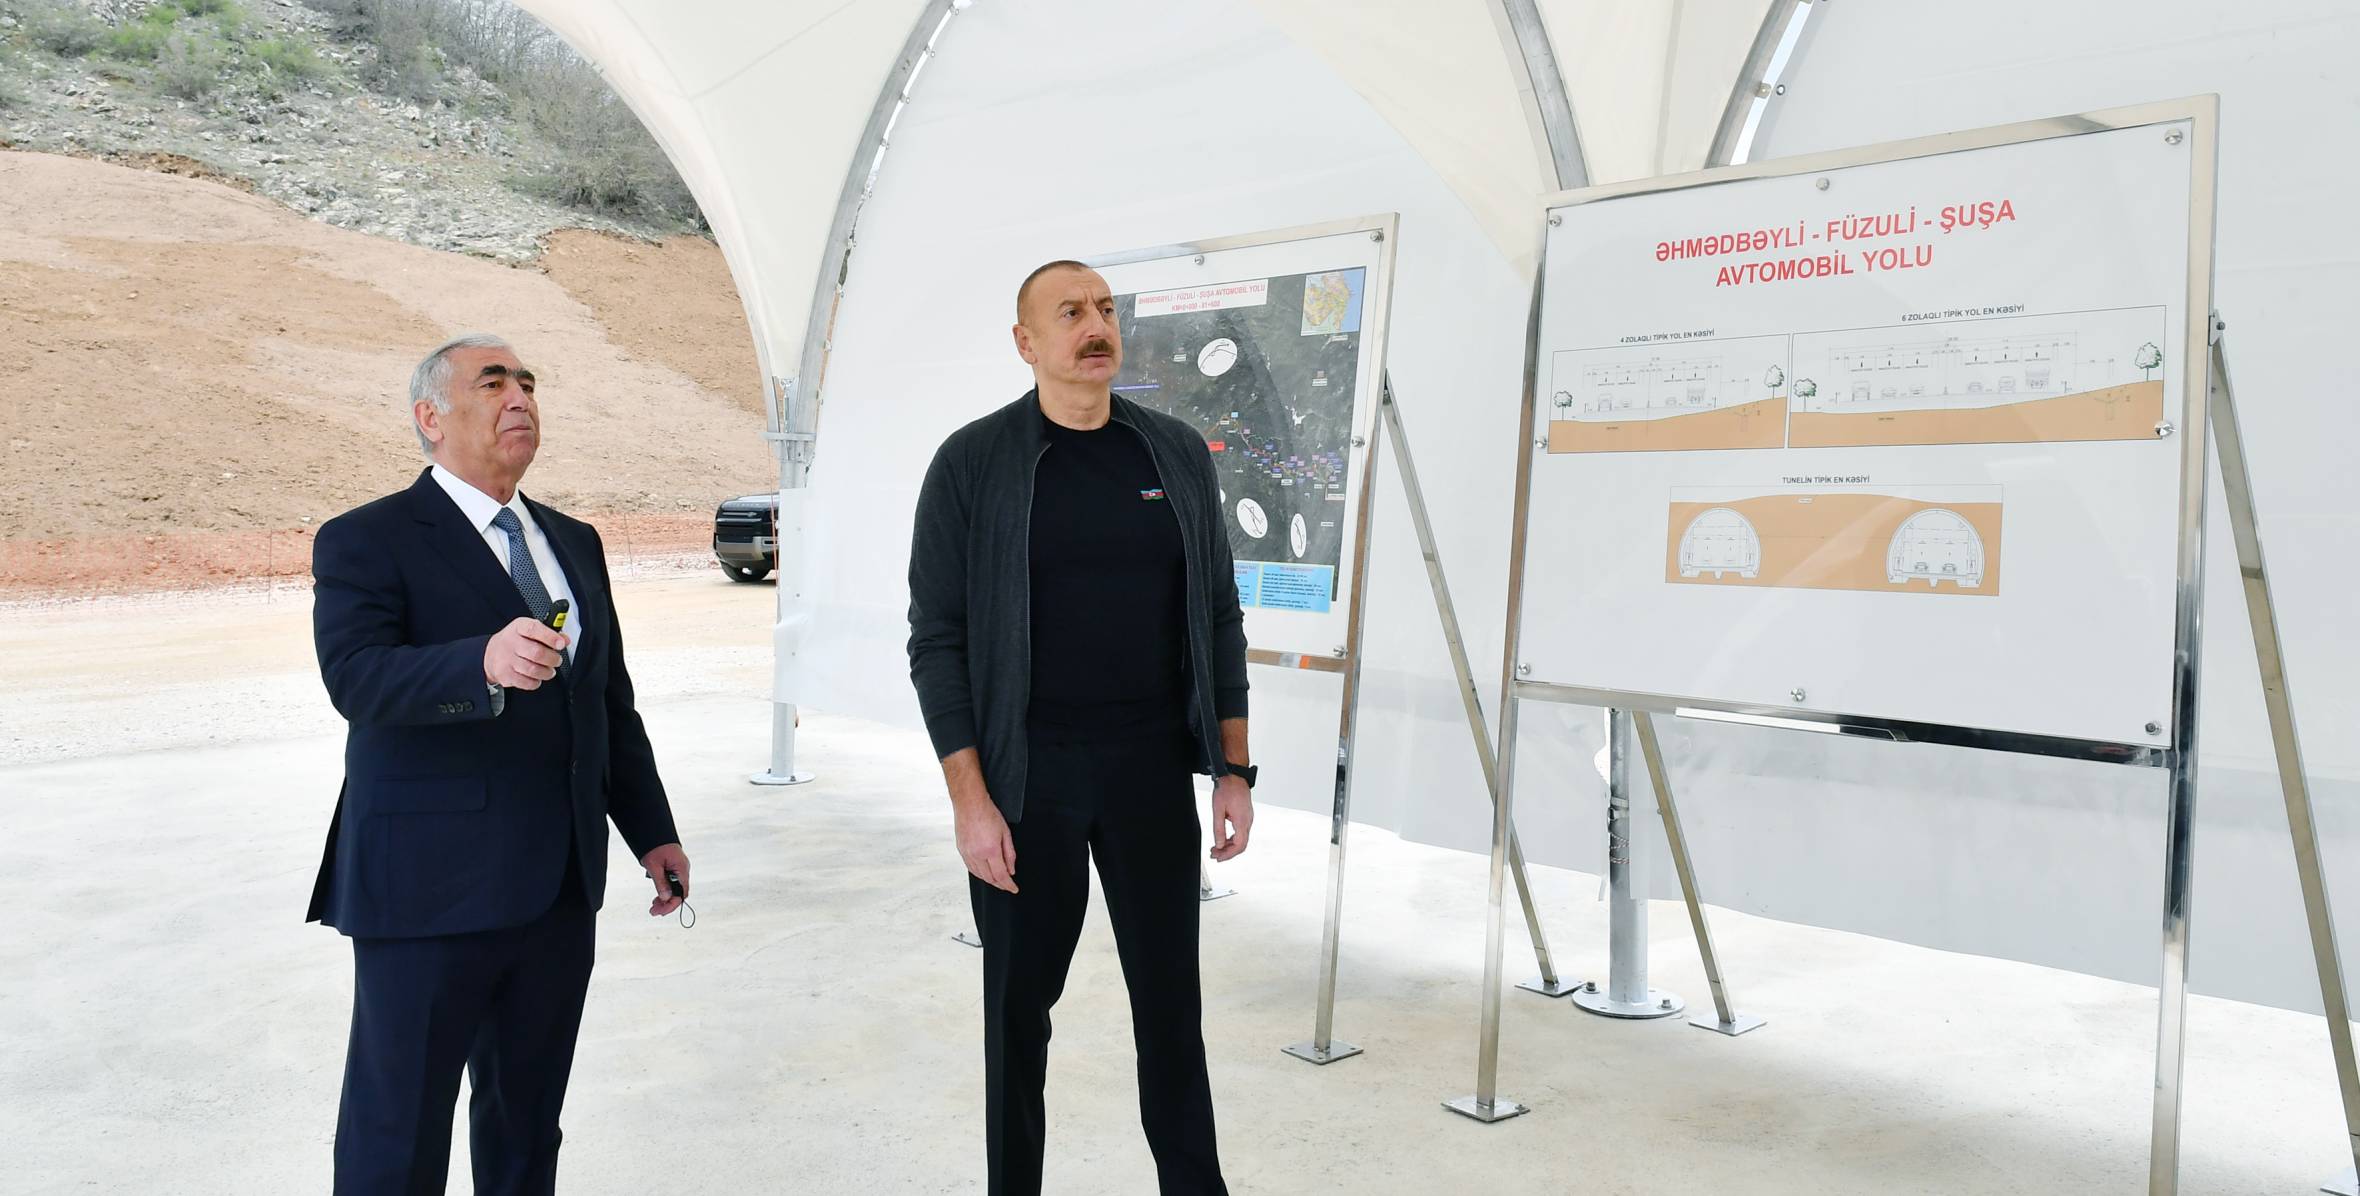 Ilham Aliyev viewed restoration work to be carried out at Kondalanchay reservoirs and construction of Ahmadbayli-Fuzuli-Shusha highway and tunnels on the road, major overhaul of administrative building and construction of conference hall in Shusha